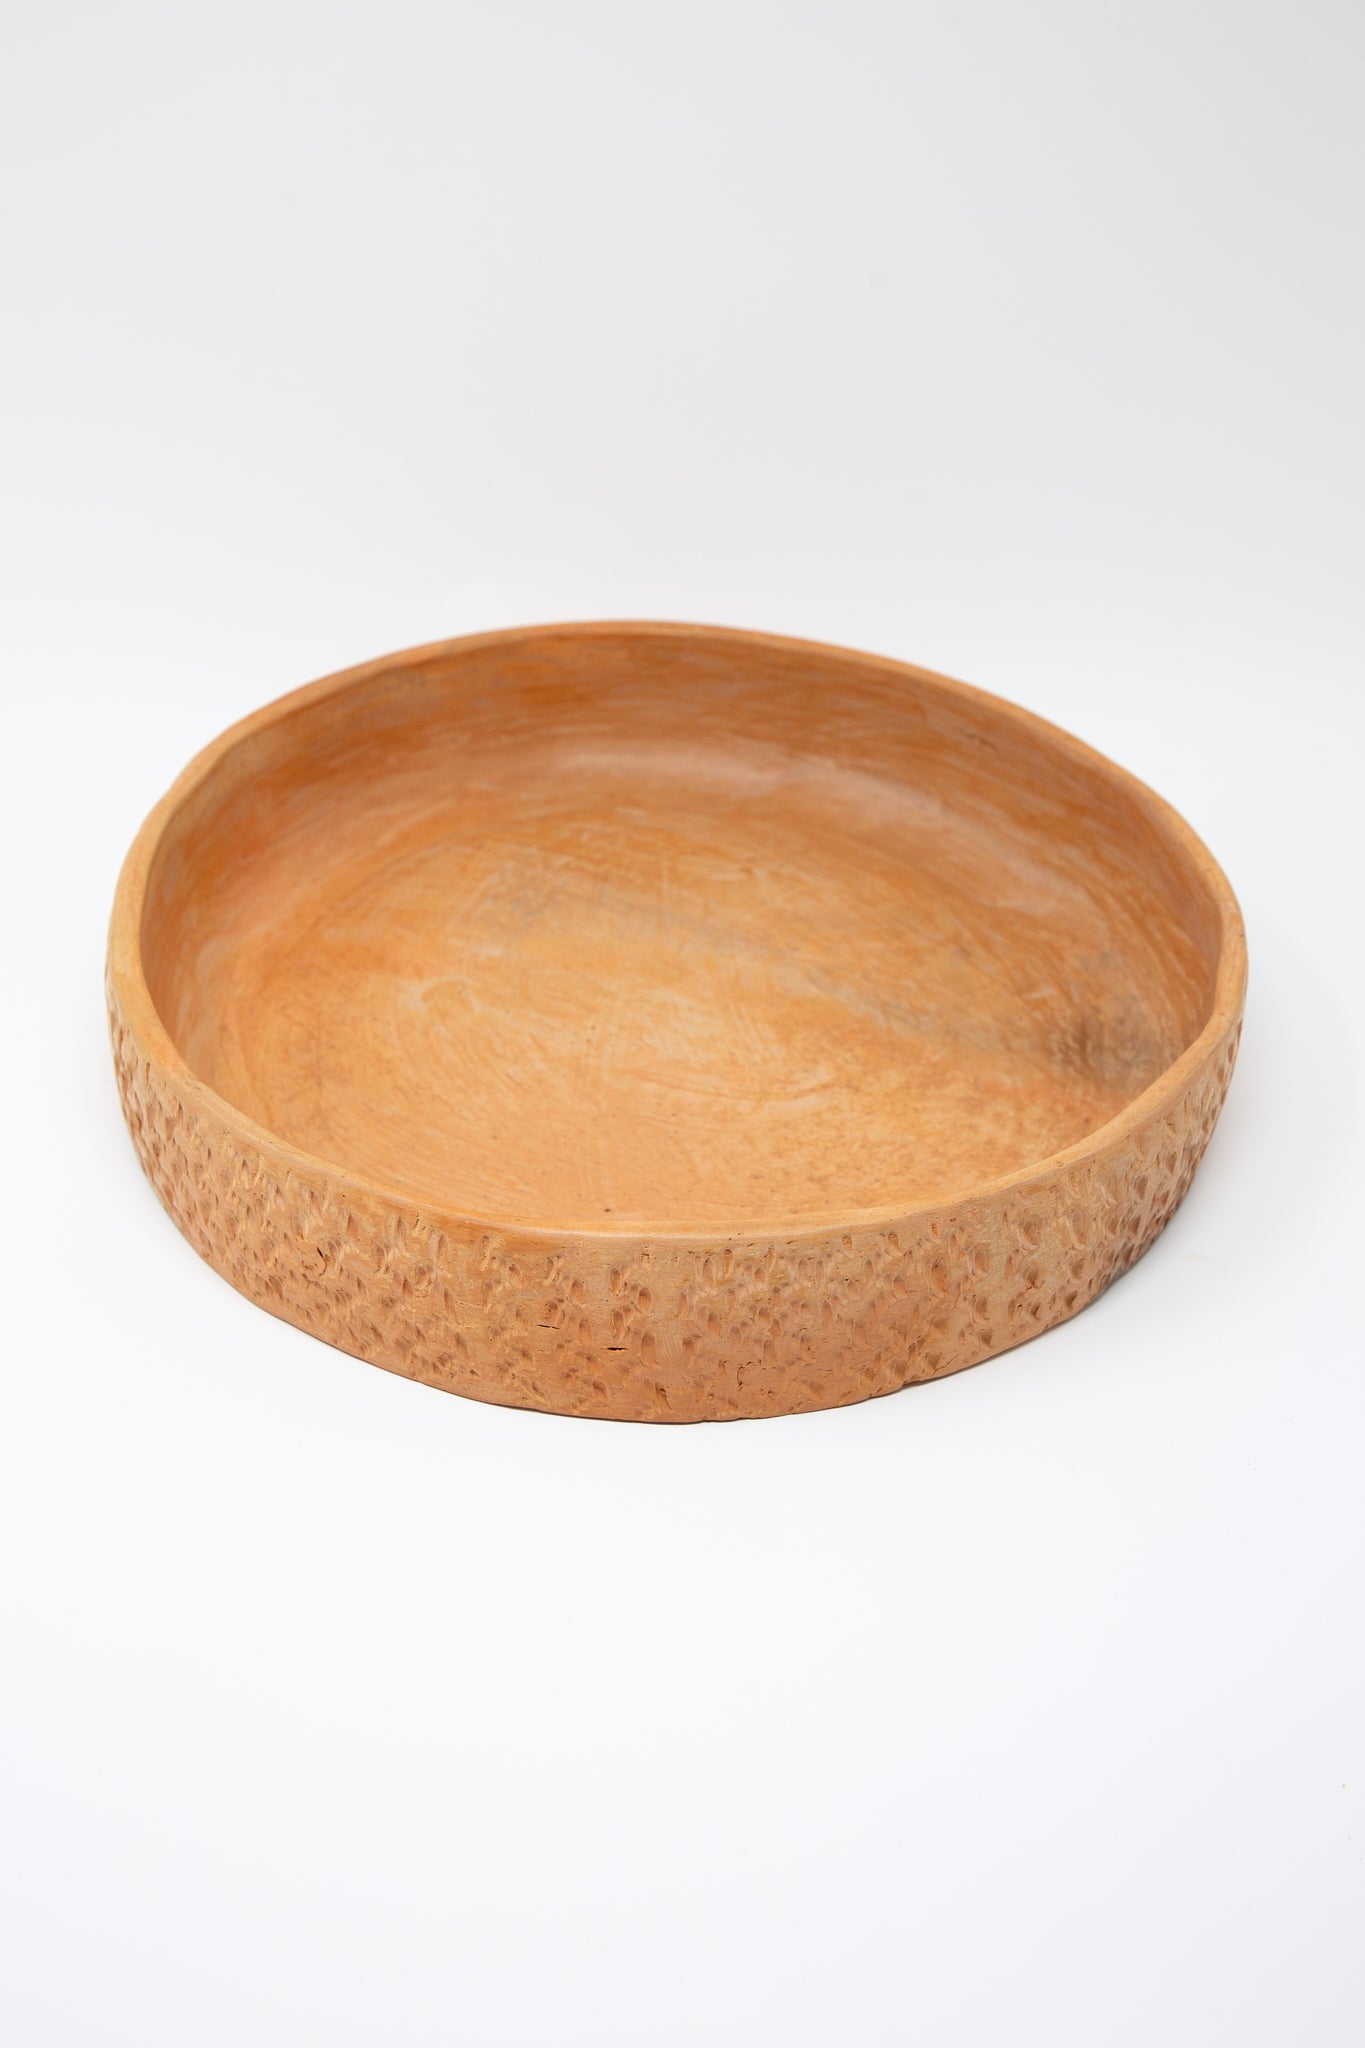 A round wooden bowl on a Julia Frutero Platter in Red Clay by Plaza Bolivar.